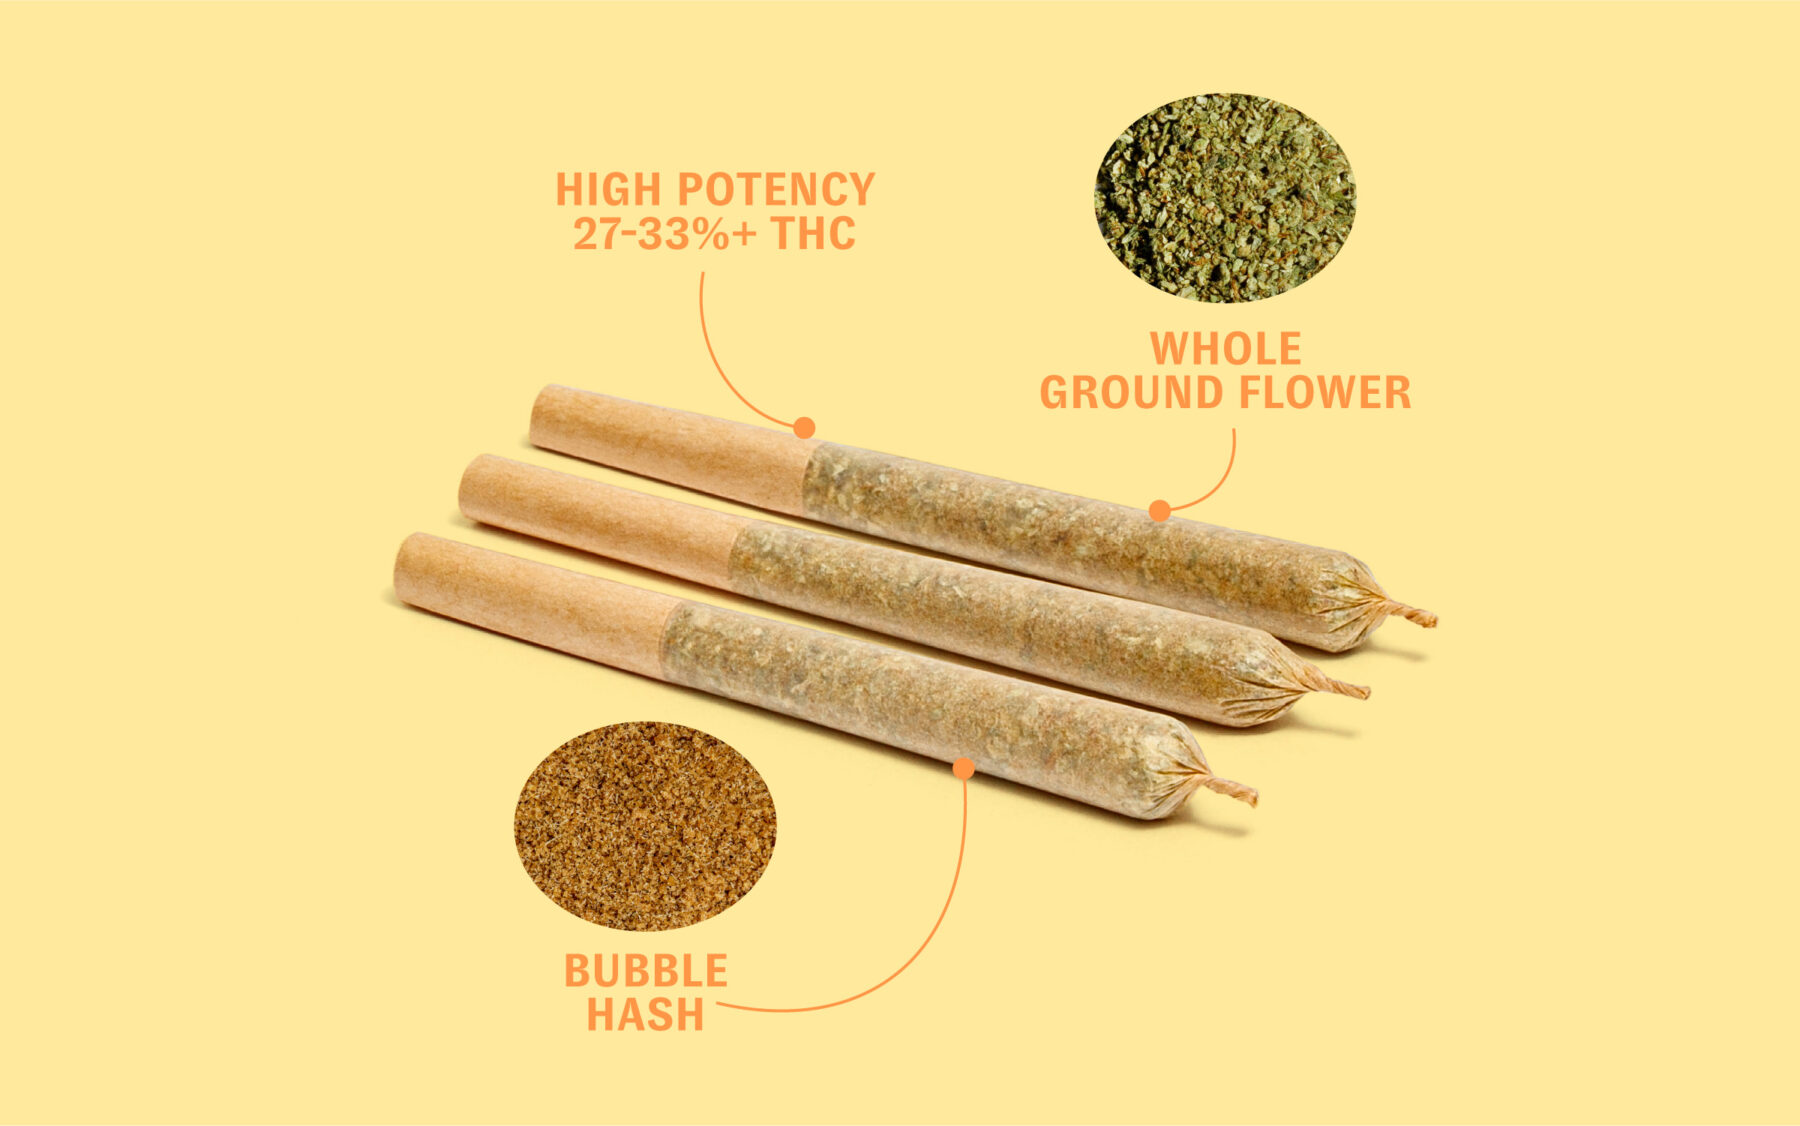 weed cannabis, hash, high thc potency pre-rolls.